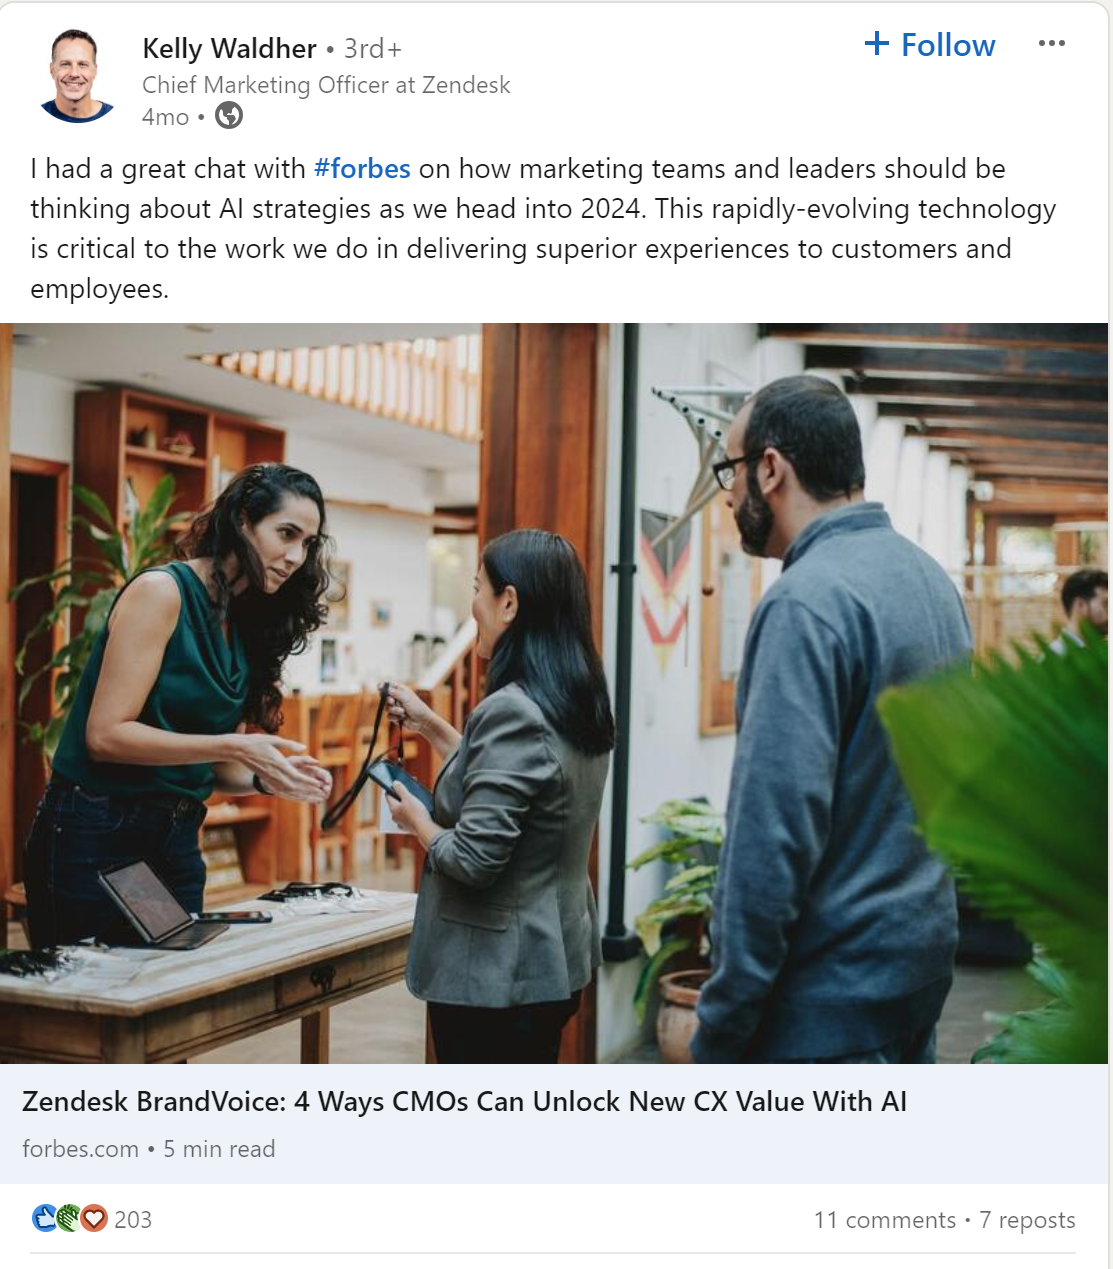 Zendesk CMO shares Forbes interview post about AI